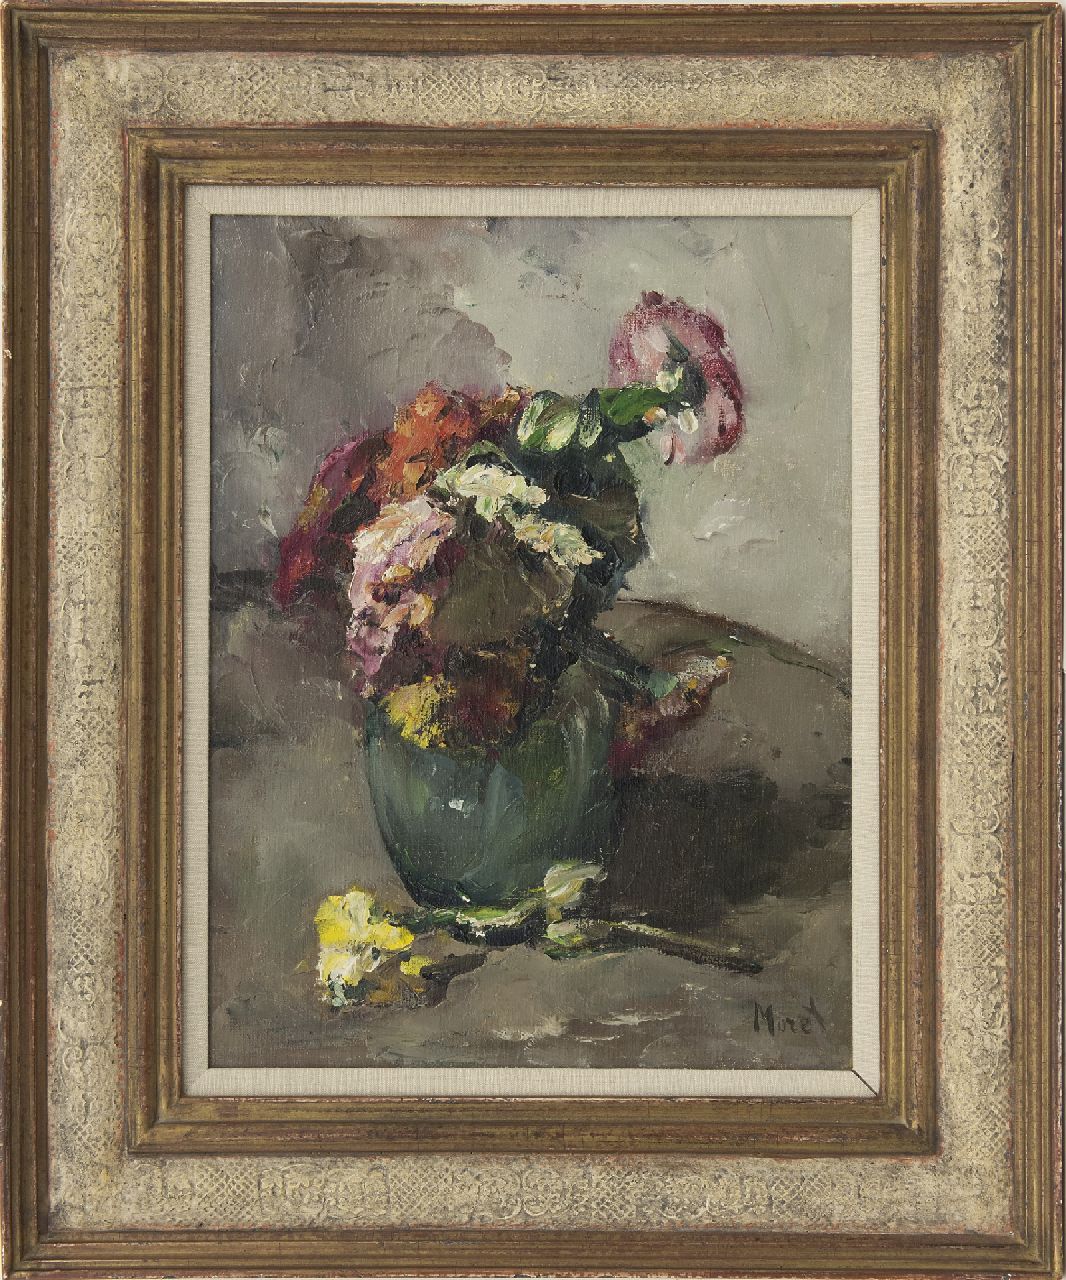 Moret C.S.A.  | Christina Sophia Antonia 'Christine' Moret | Paintings offered for sale | A flower still life, oil on canvas 40.0 x 30.4 cm, signed l.r.